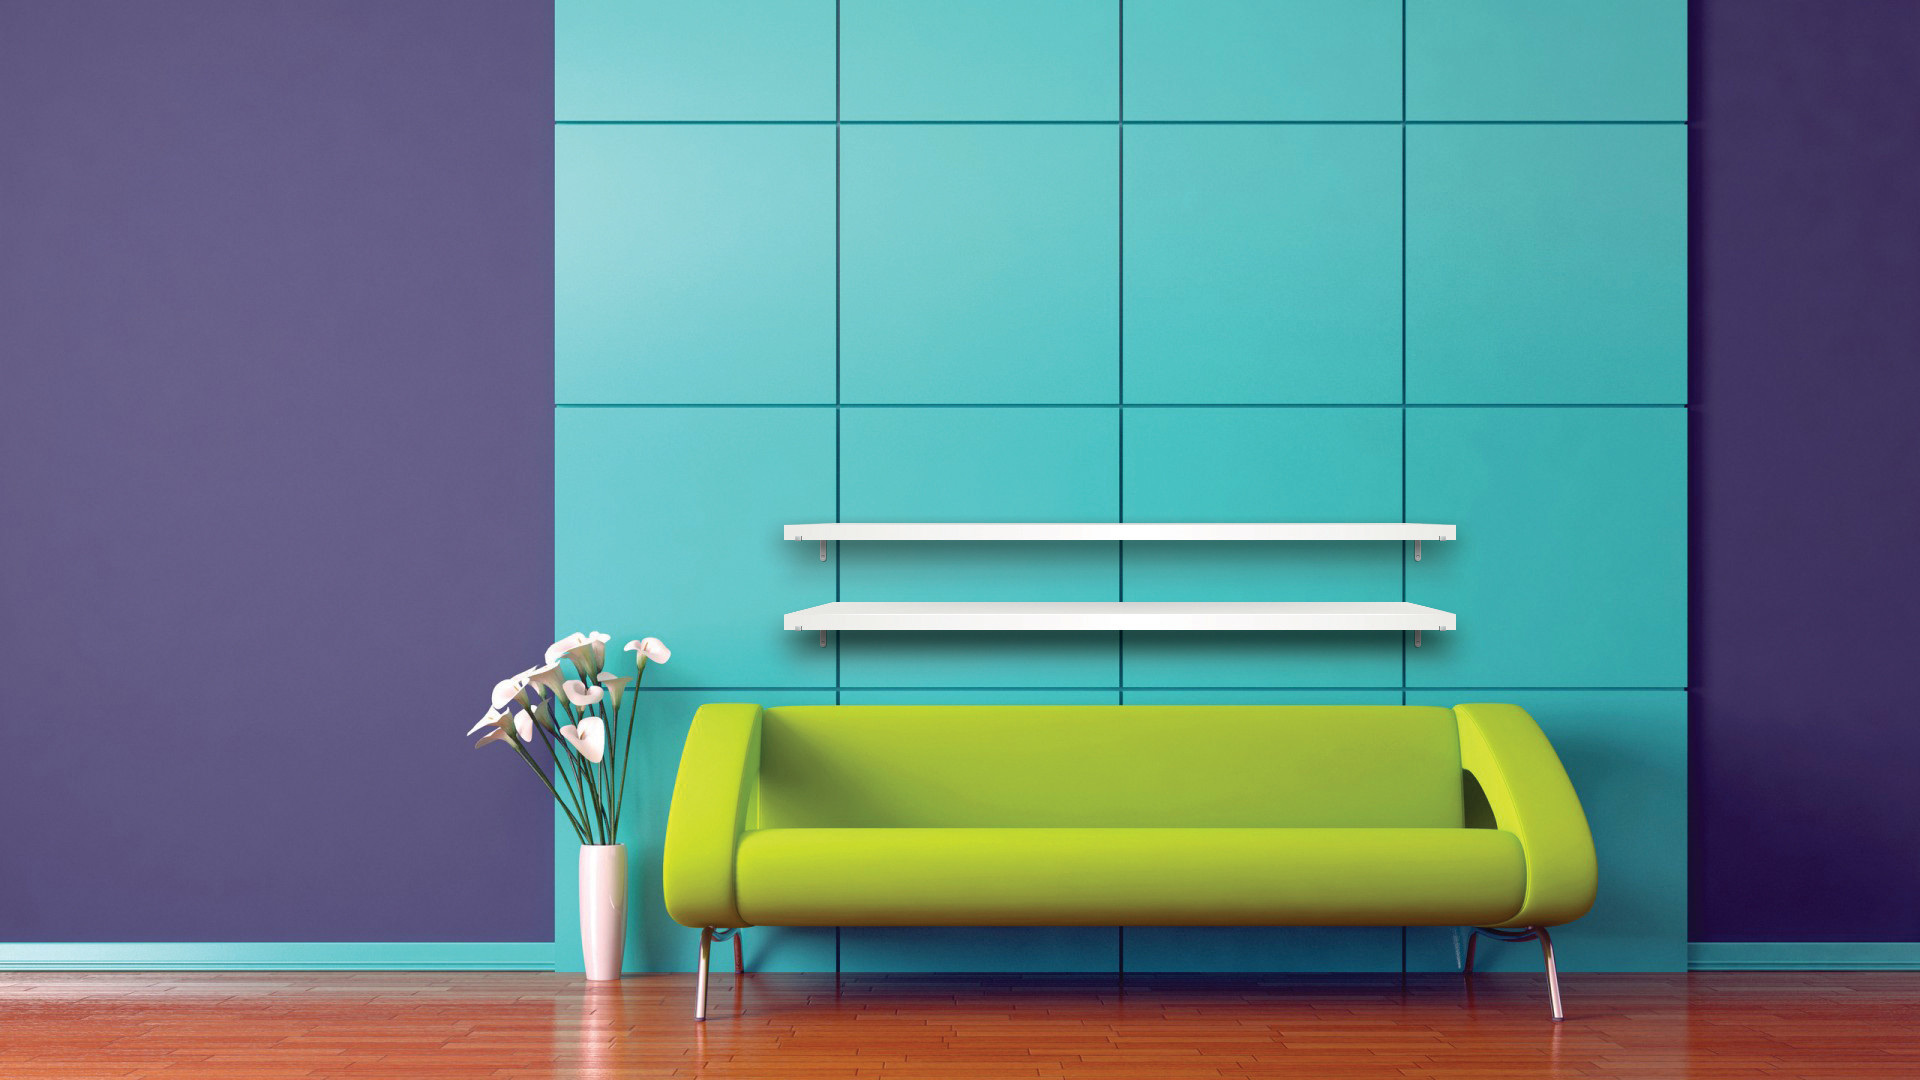 Green Sofa with Shelves : wallpapers